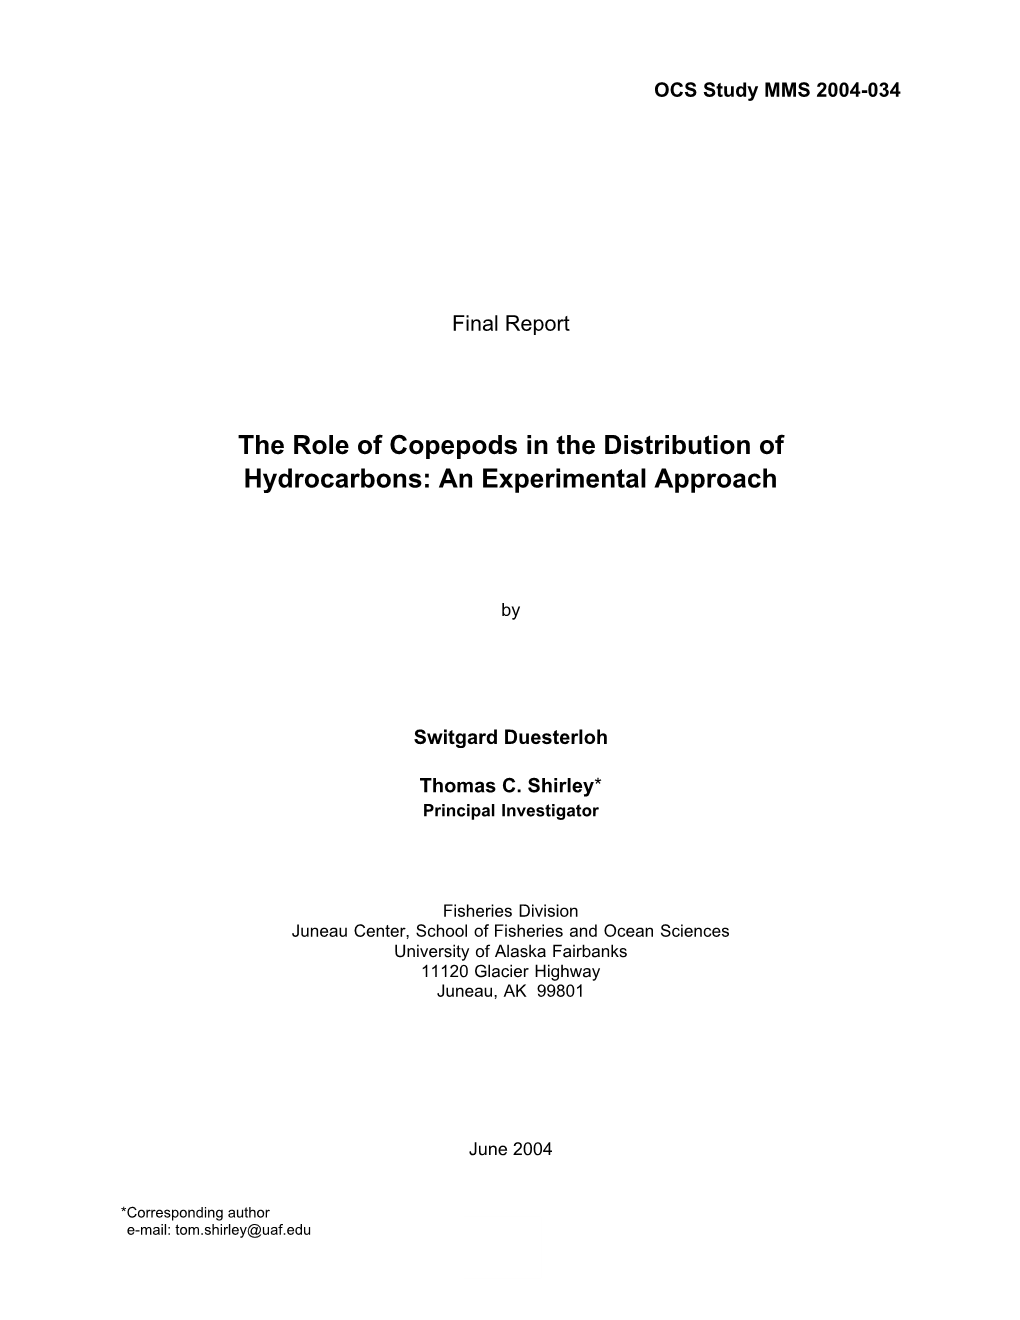 The Role of Copepods in the Distribution of Hydrocarbons: an Experimental Approach